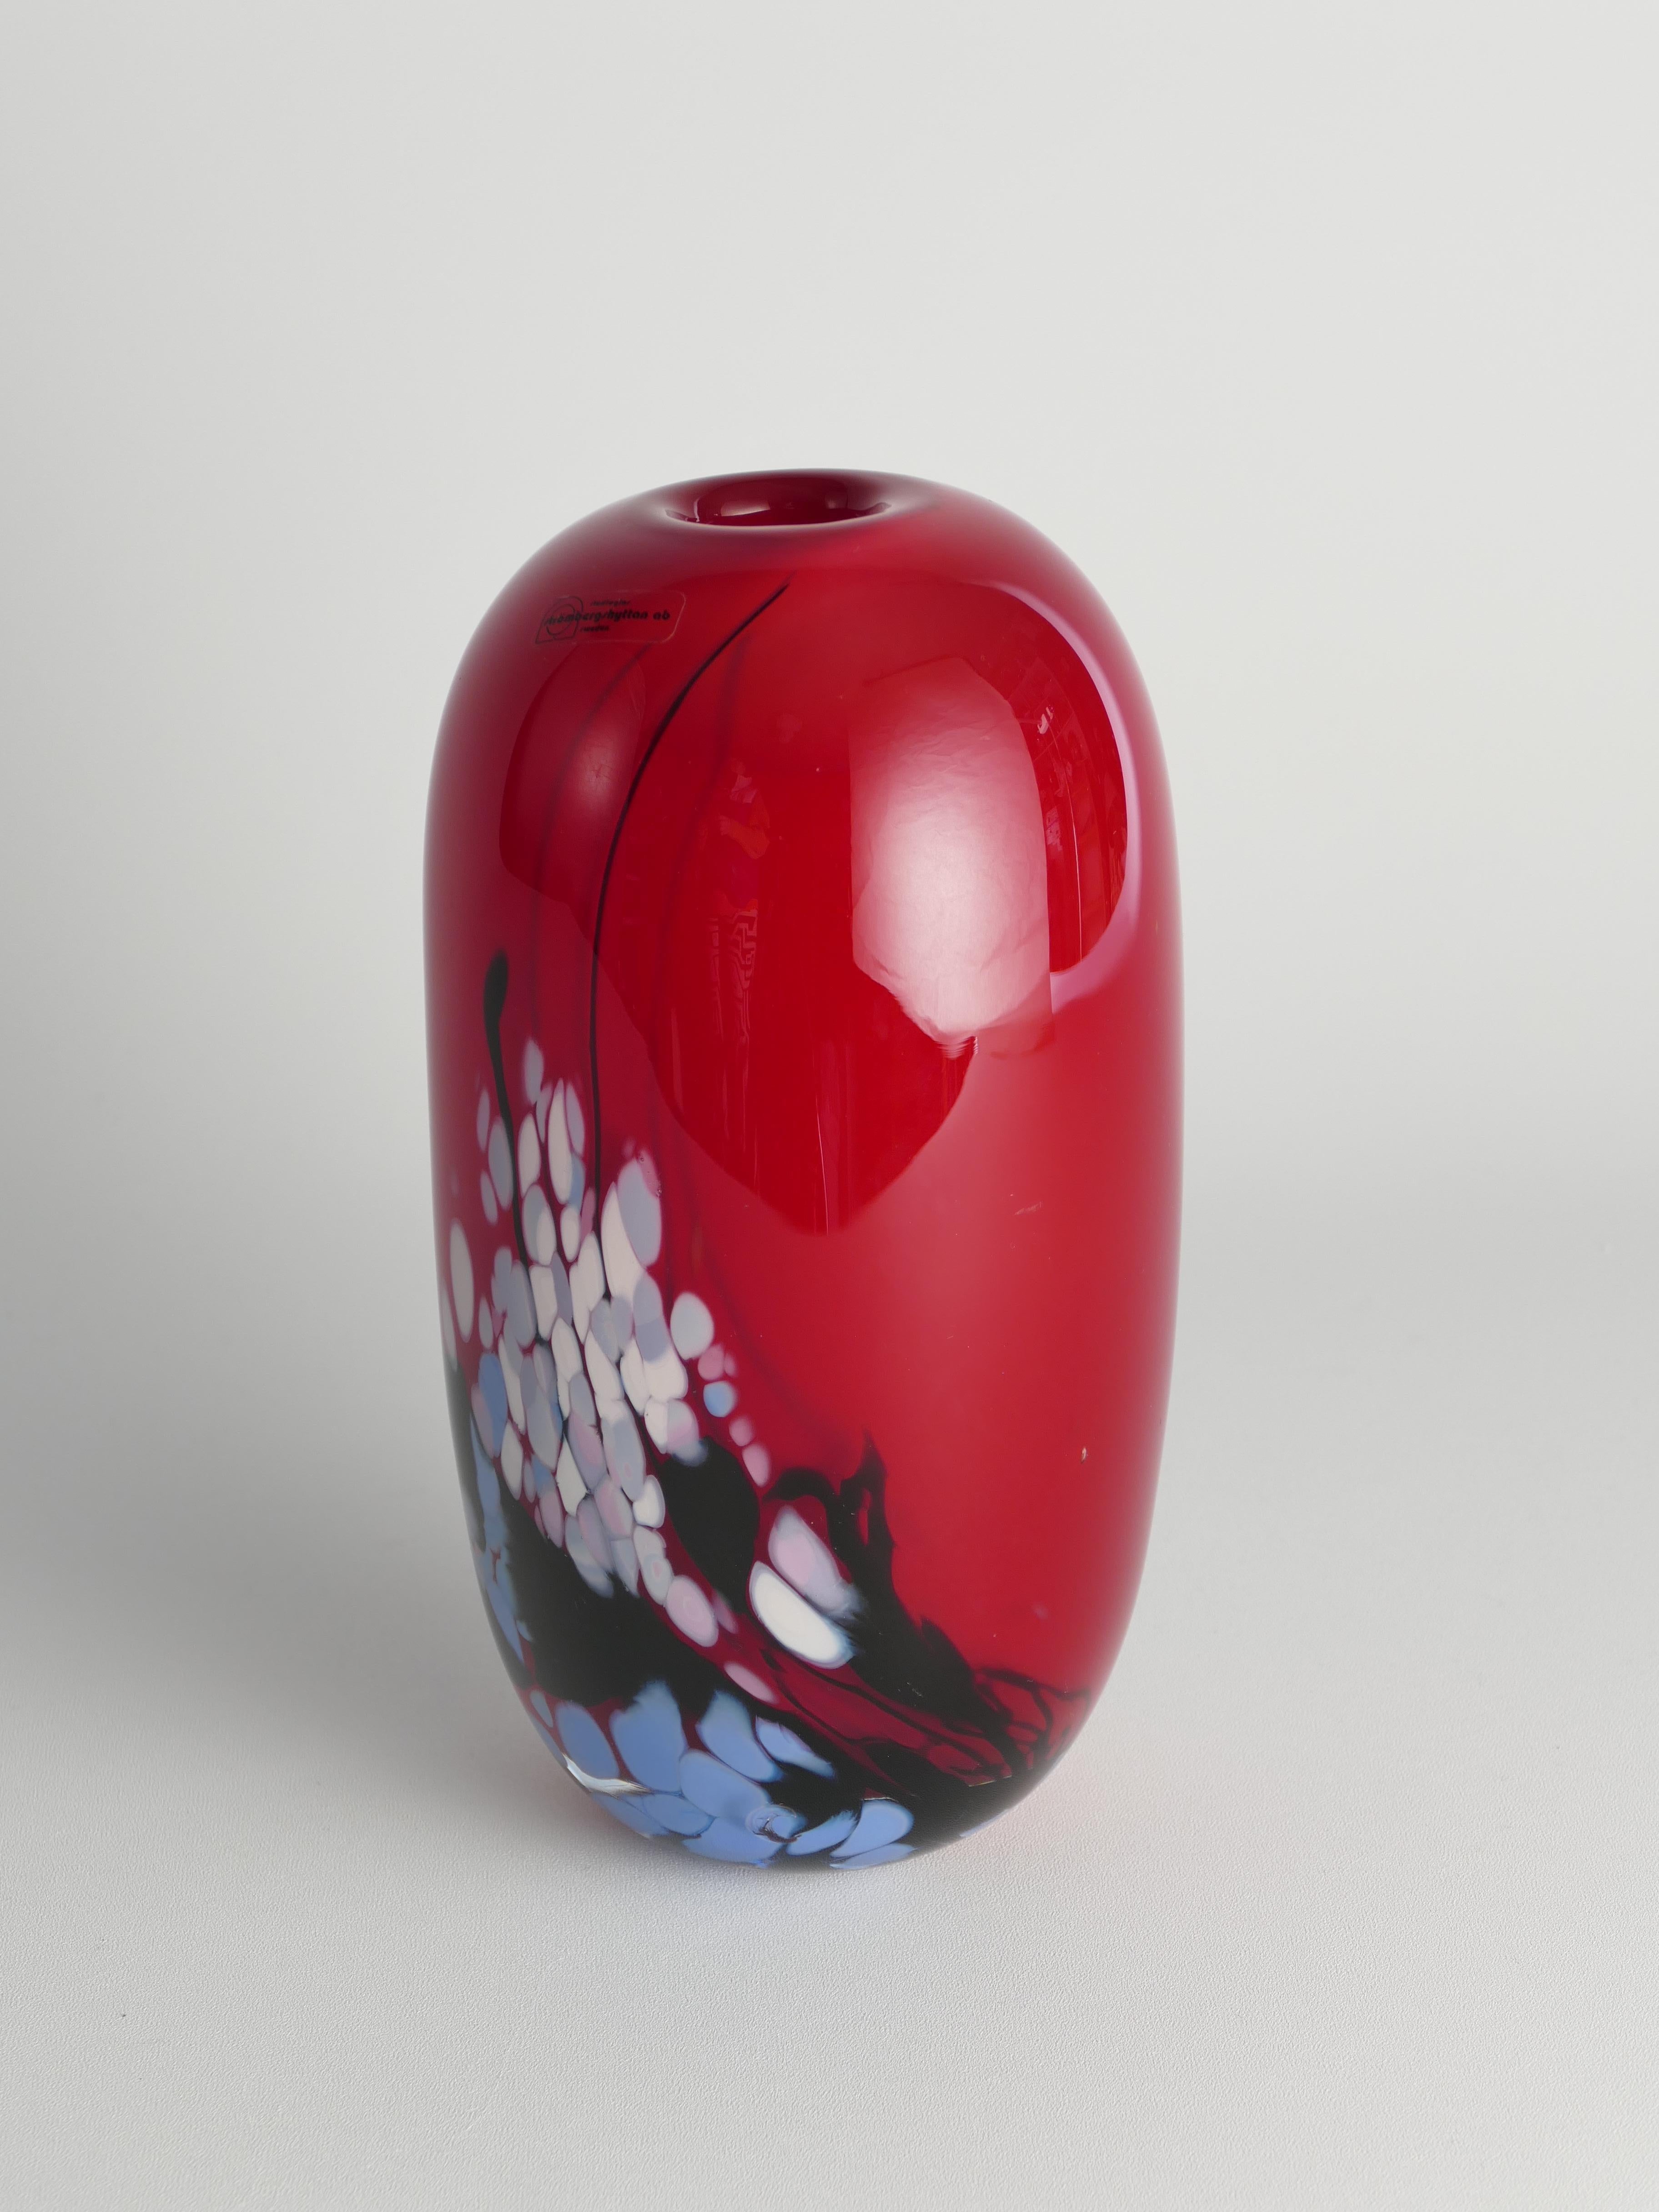 Unique Cherry Red Art Glass Vase by Mikael Axenbrant, Sweden 1990 For Sale 11